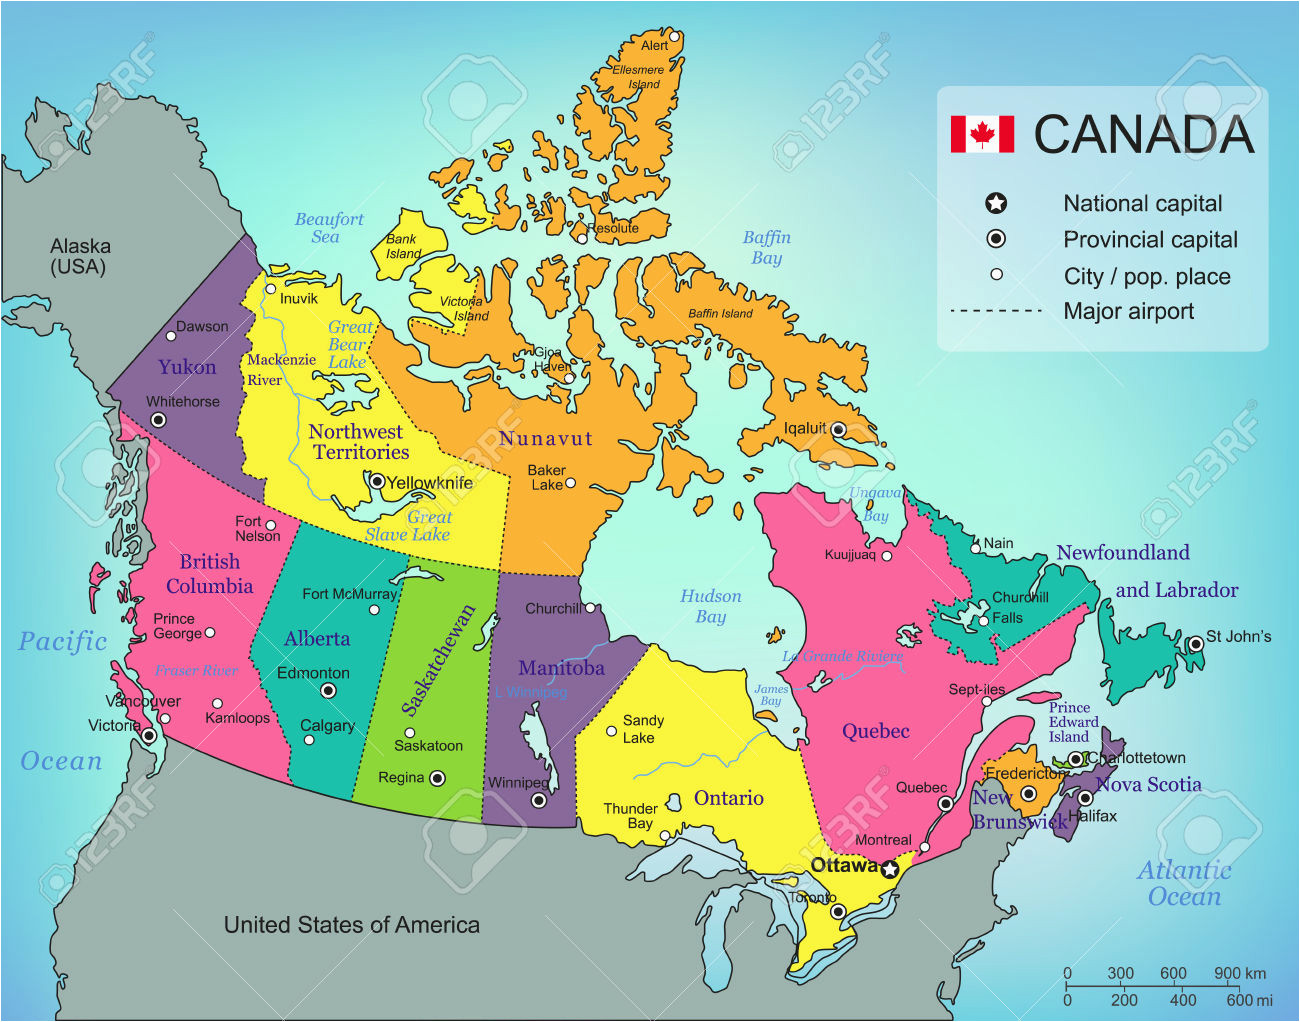 A Map Of Canada With Provinces And Capitals Canada Provincial Capitals Map Canada Map Study Game Canada Map Test Of A Map Of Canada With Provinces And Capitals 